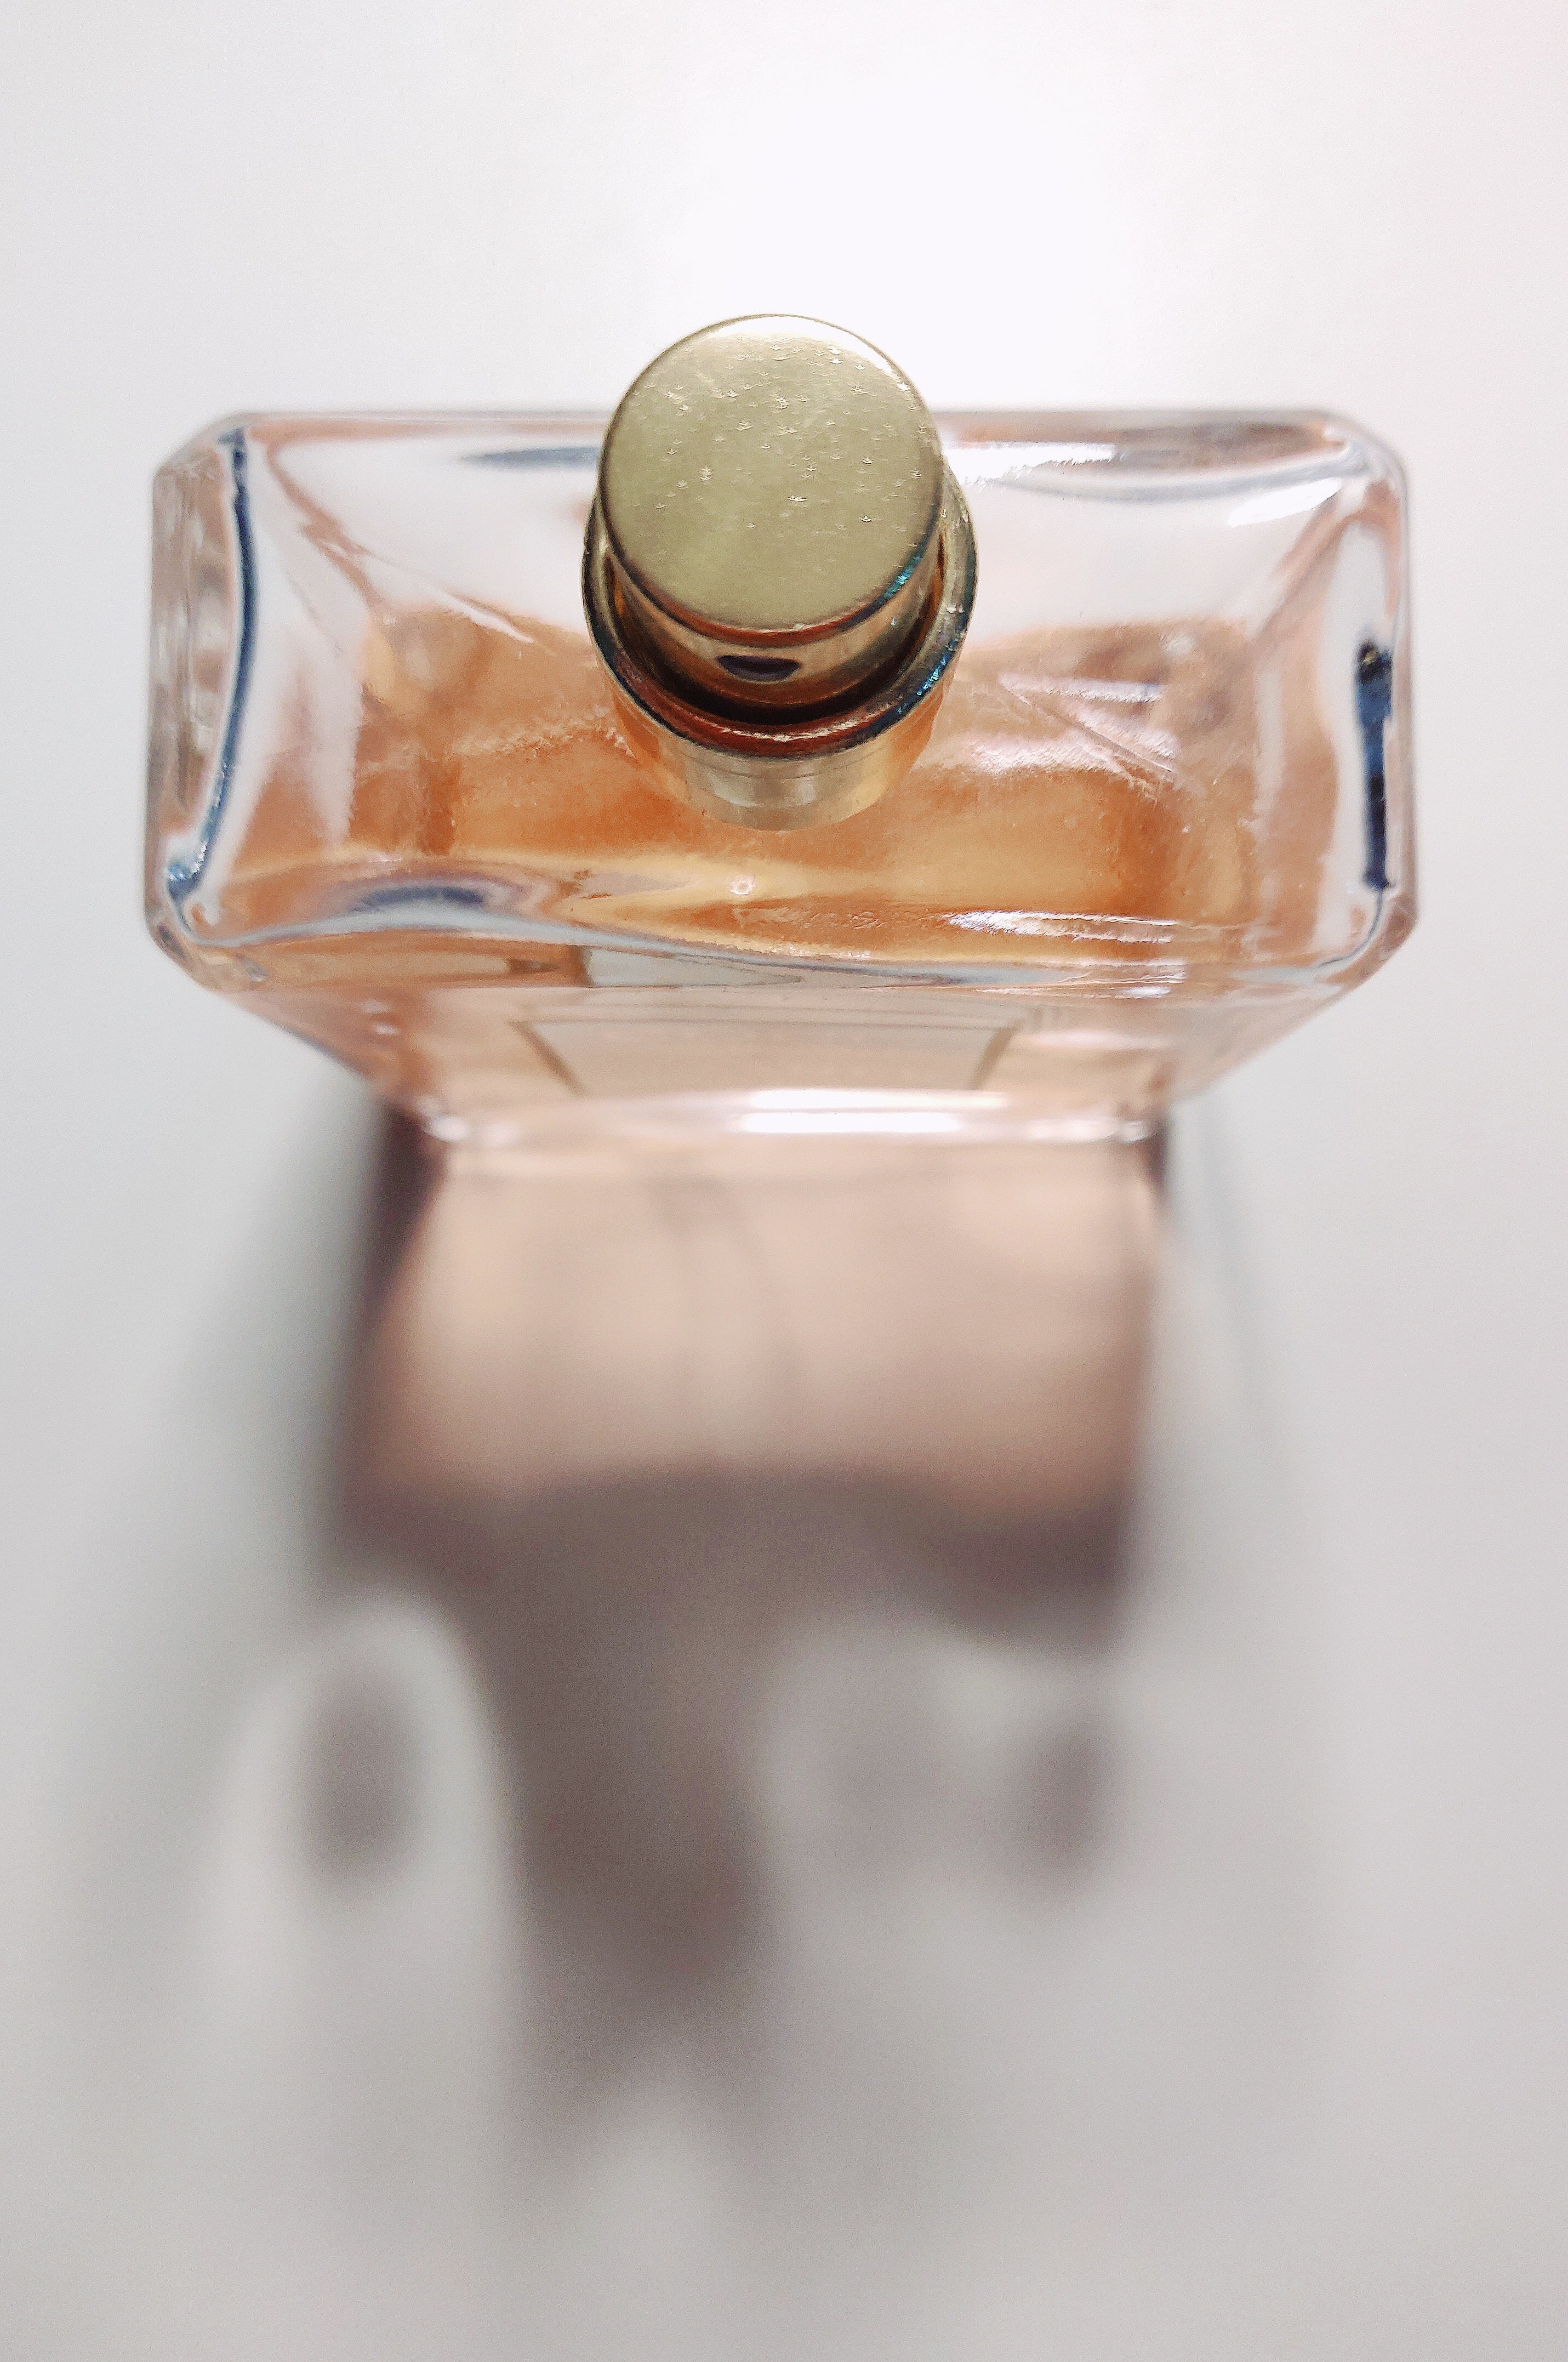 Scent of the day: Louis Vuitton Spell On You: a lovely, green